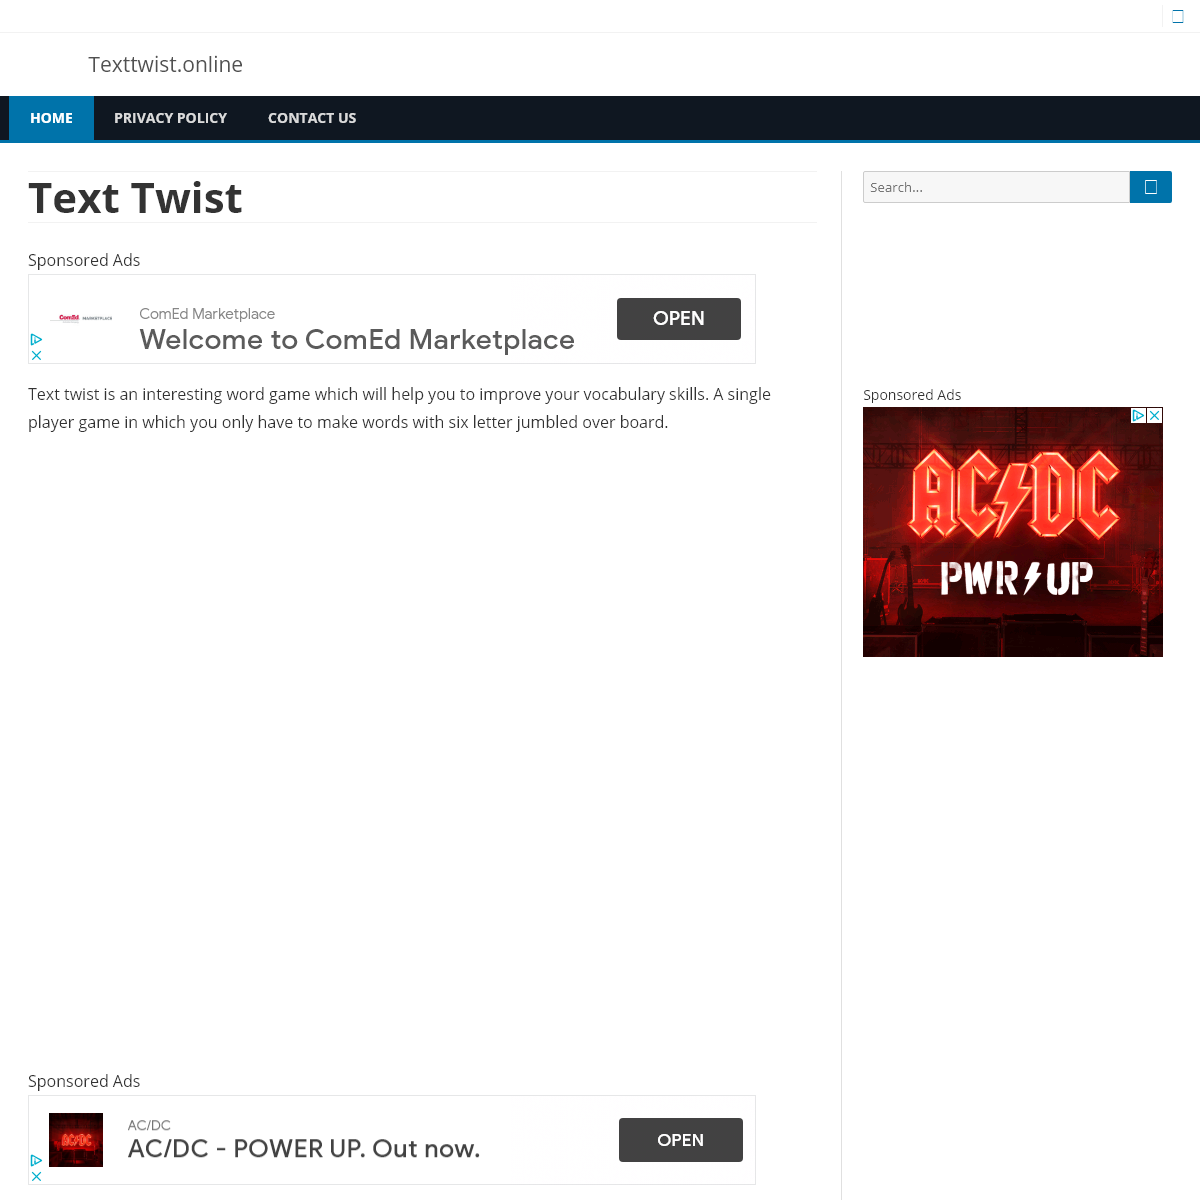 A complete backup of texttwist.online